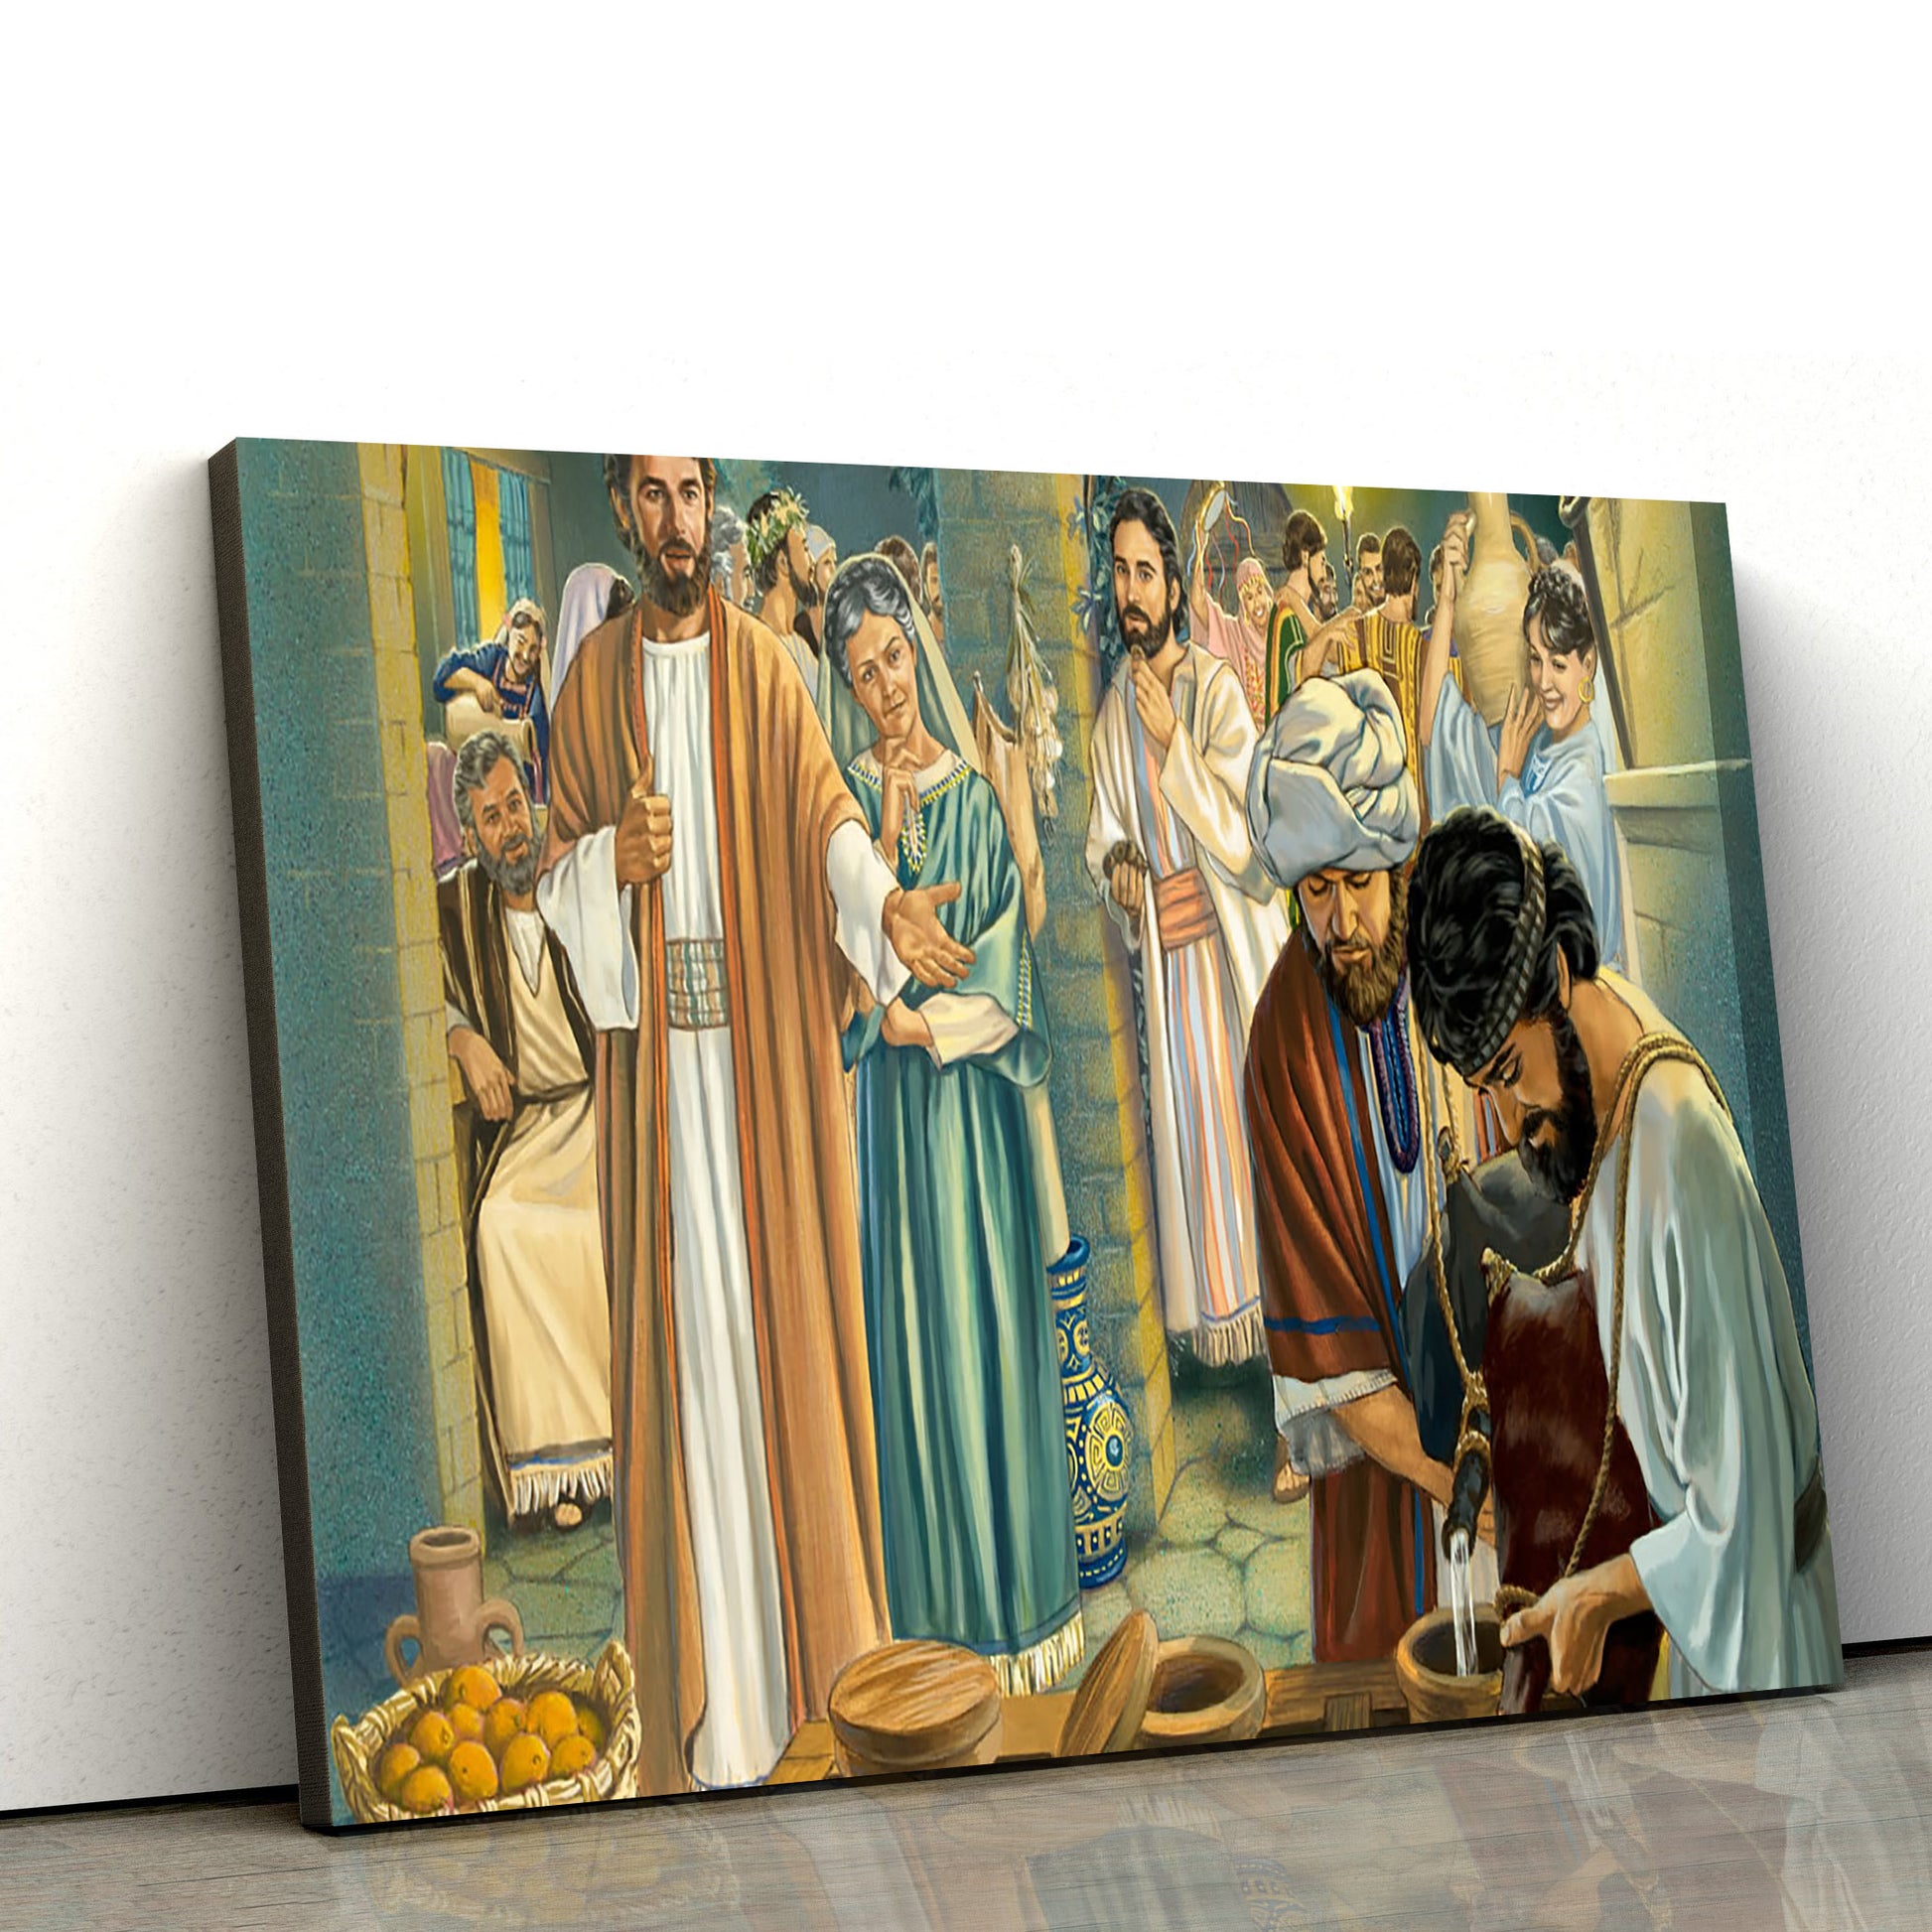 The First Miracle Cana Wedding Jesus - Jesus Canvas Wall Art - Christian Wall Art